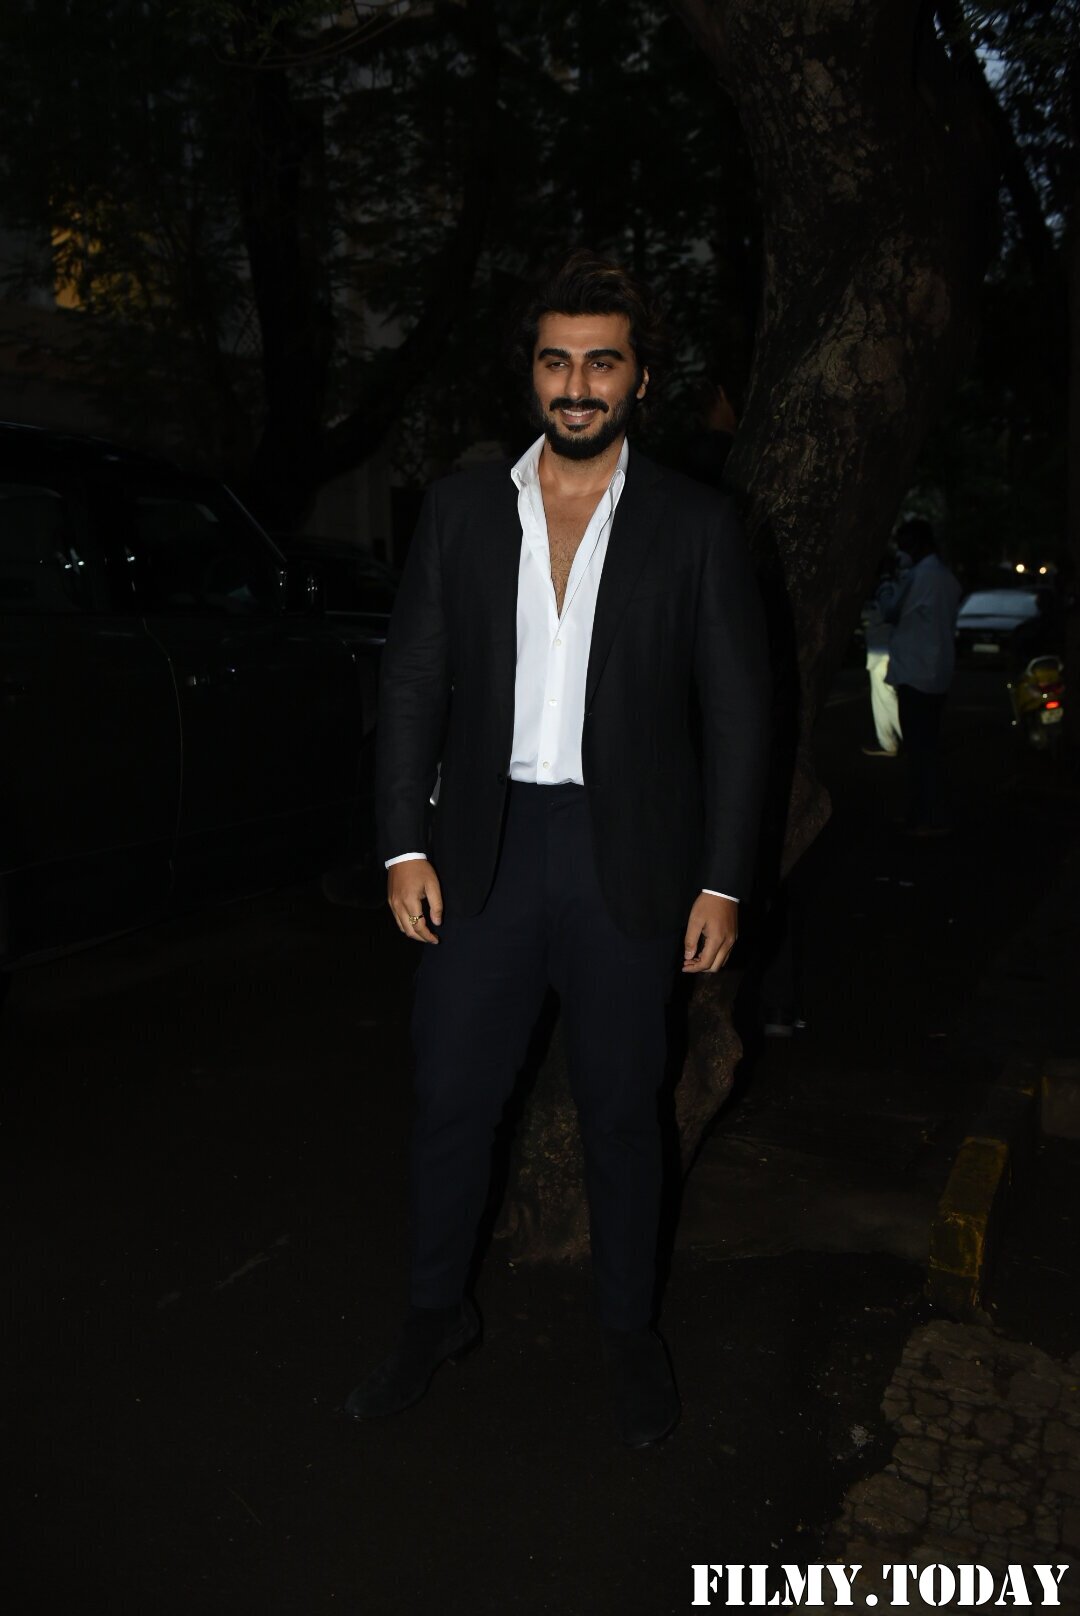 Arjun Kapoor - Photos: Celebs At Rhea Kapoor Wedding Party At Anil Kapoor's House | Picture 1822234